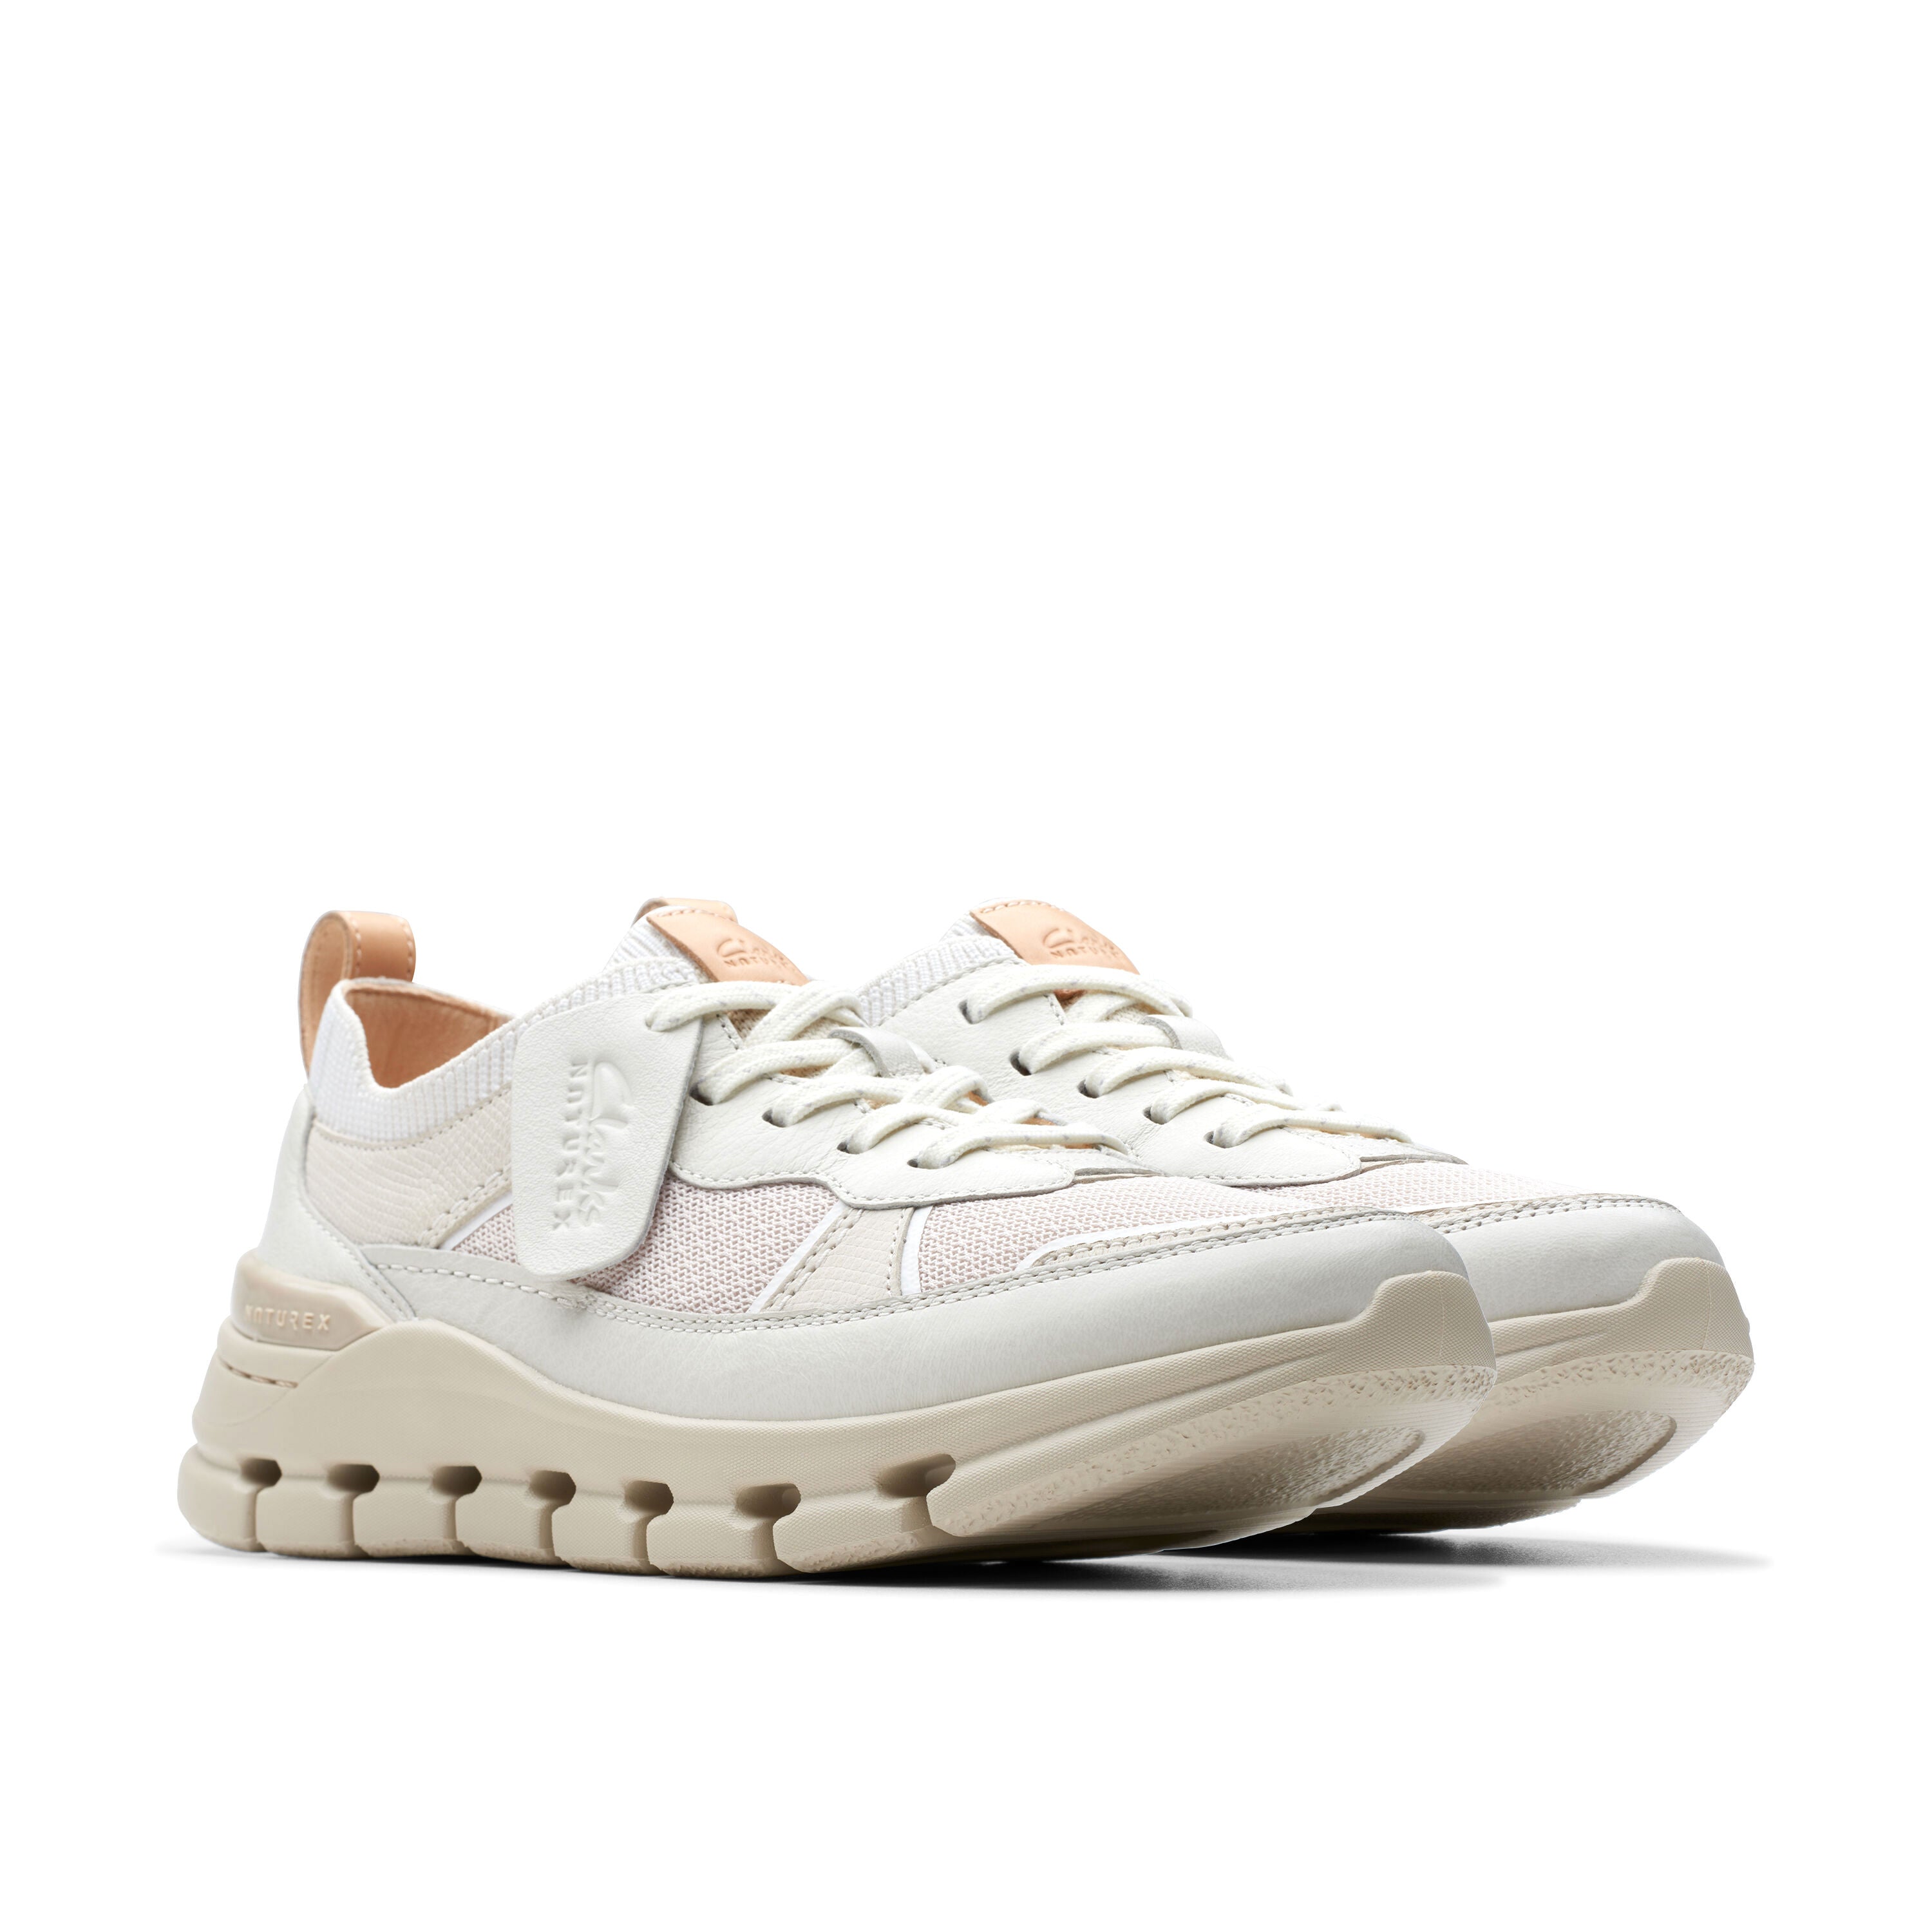 'Nature X Cove' women's walking sneakers - Off white